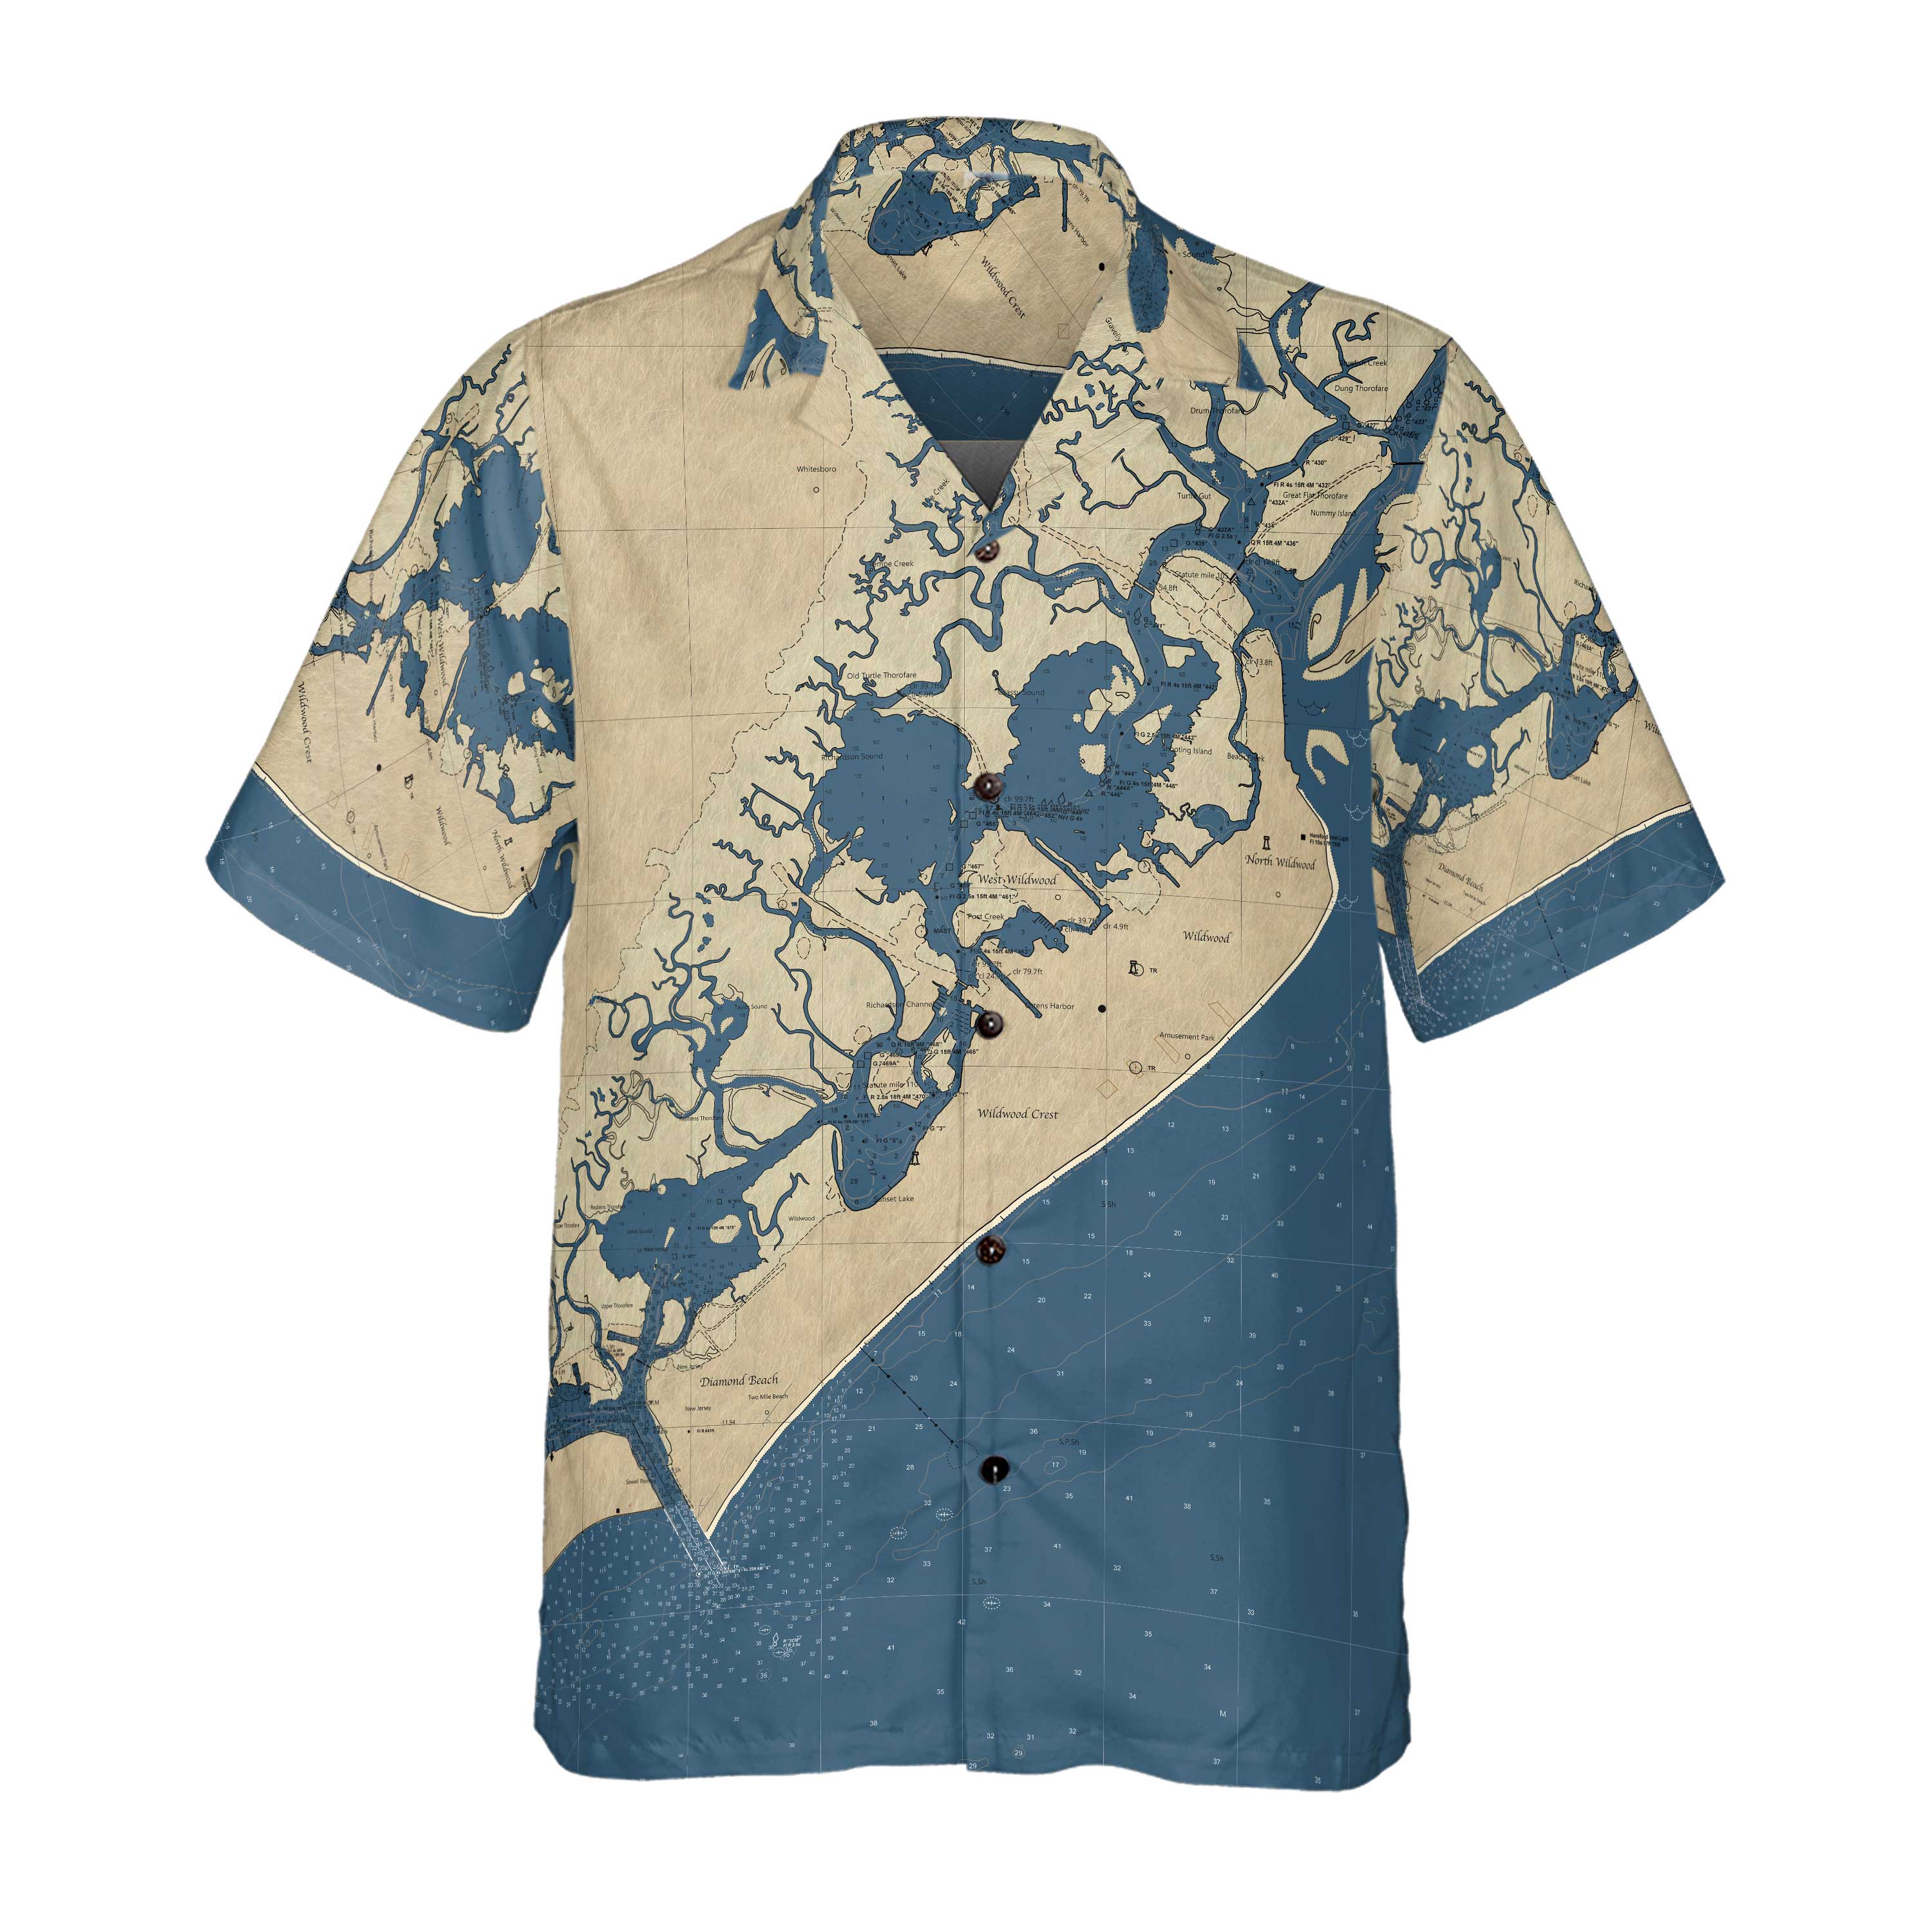 The Five Mile Island Cocktail Hour Coconut Button Camp Shirt